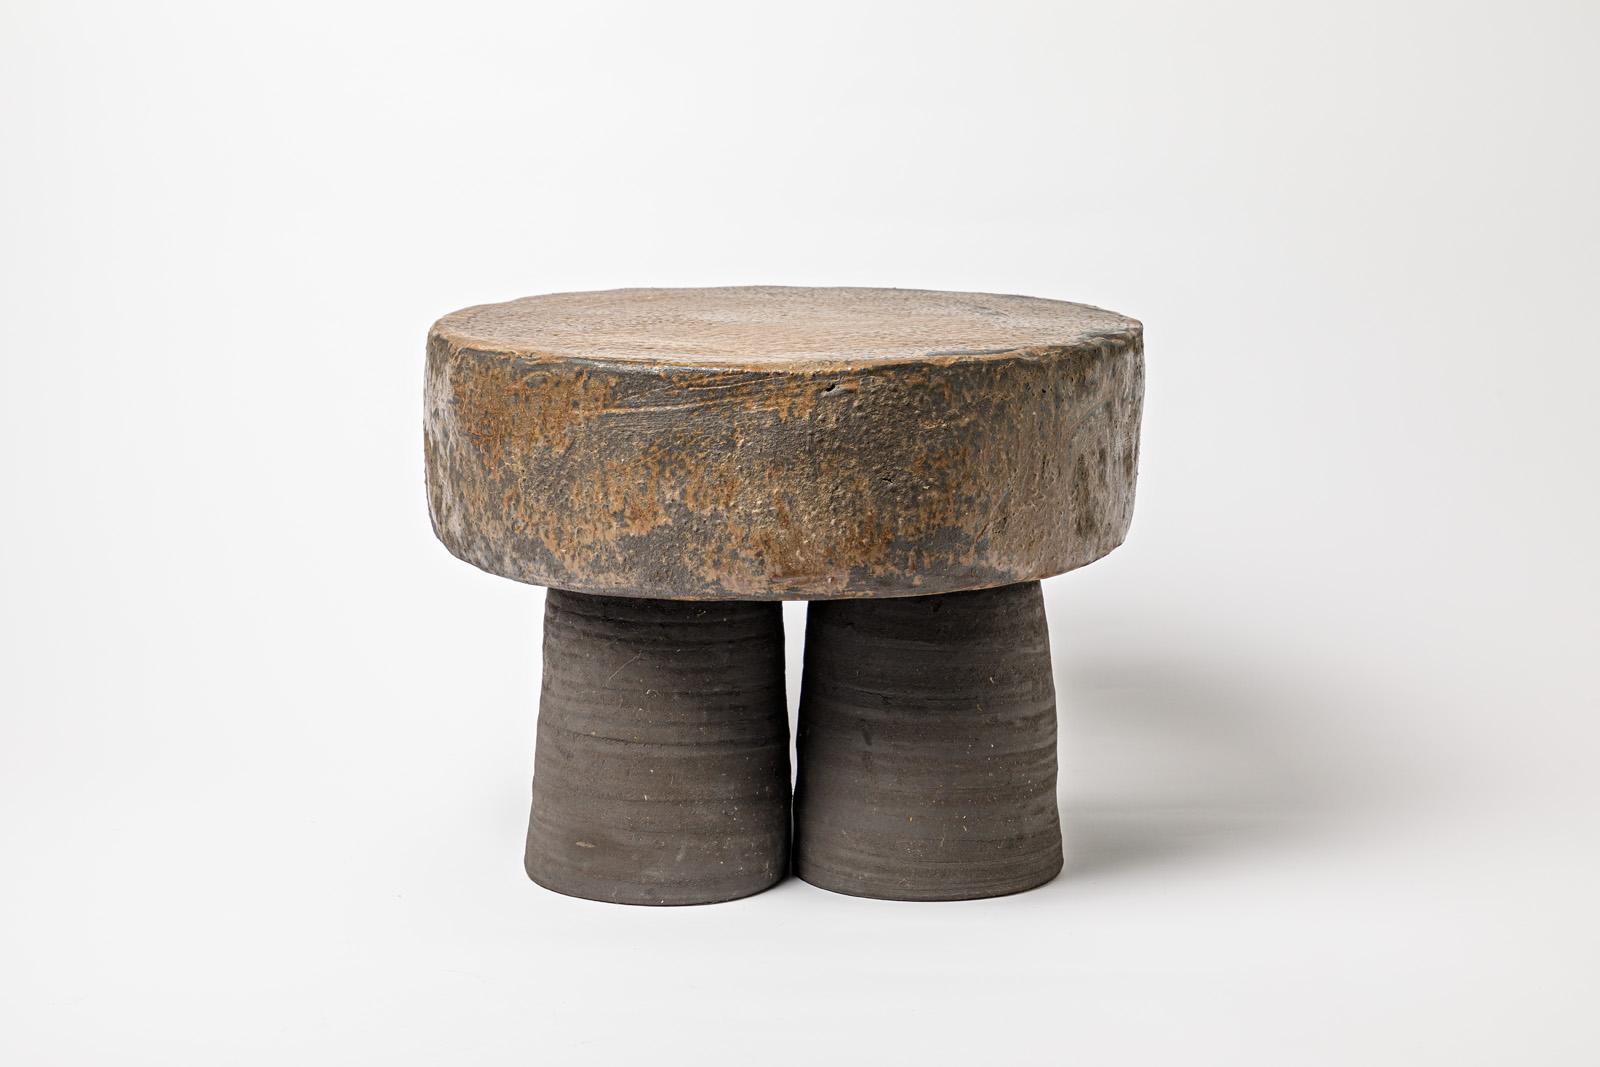 Beaux Arts Brown Glazed Ceramic Stool or Coffee Table by Mia Jensen, 2023